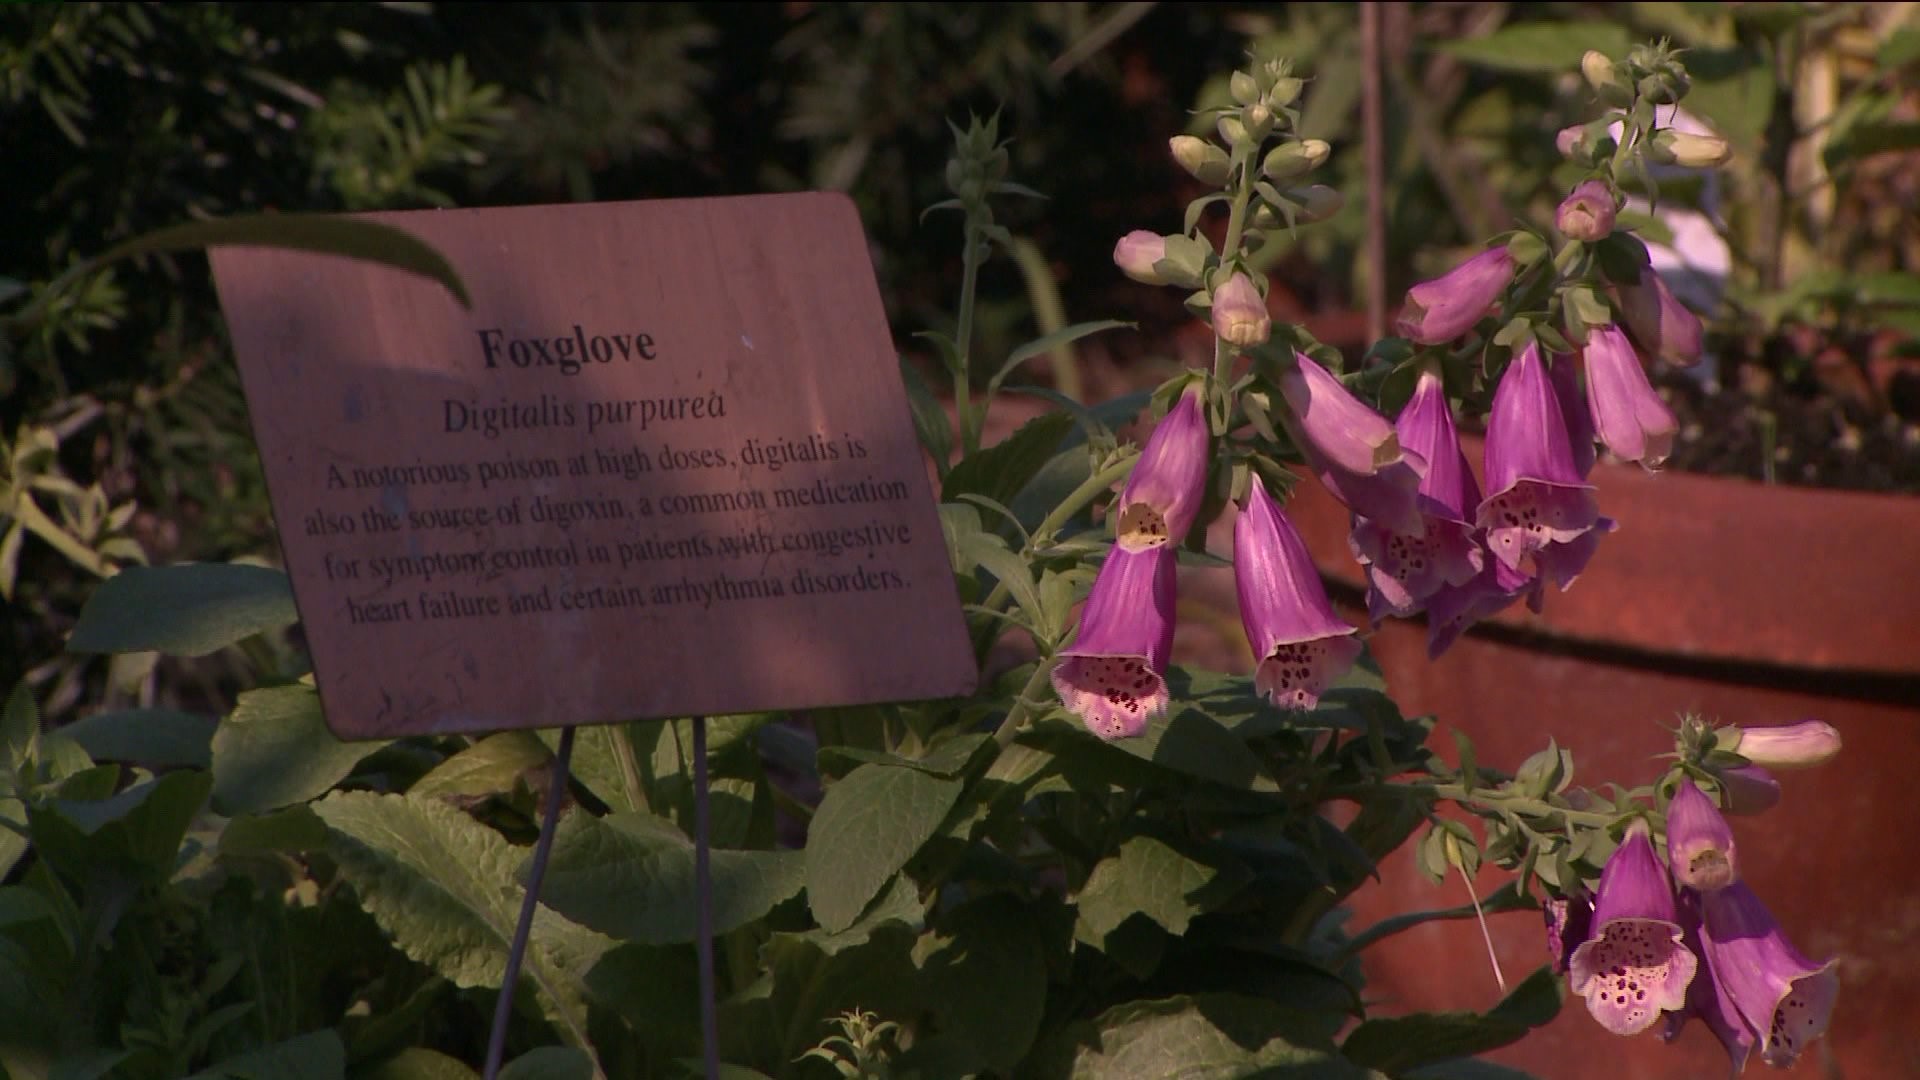 Garden teaches students and citizens about medicine history